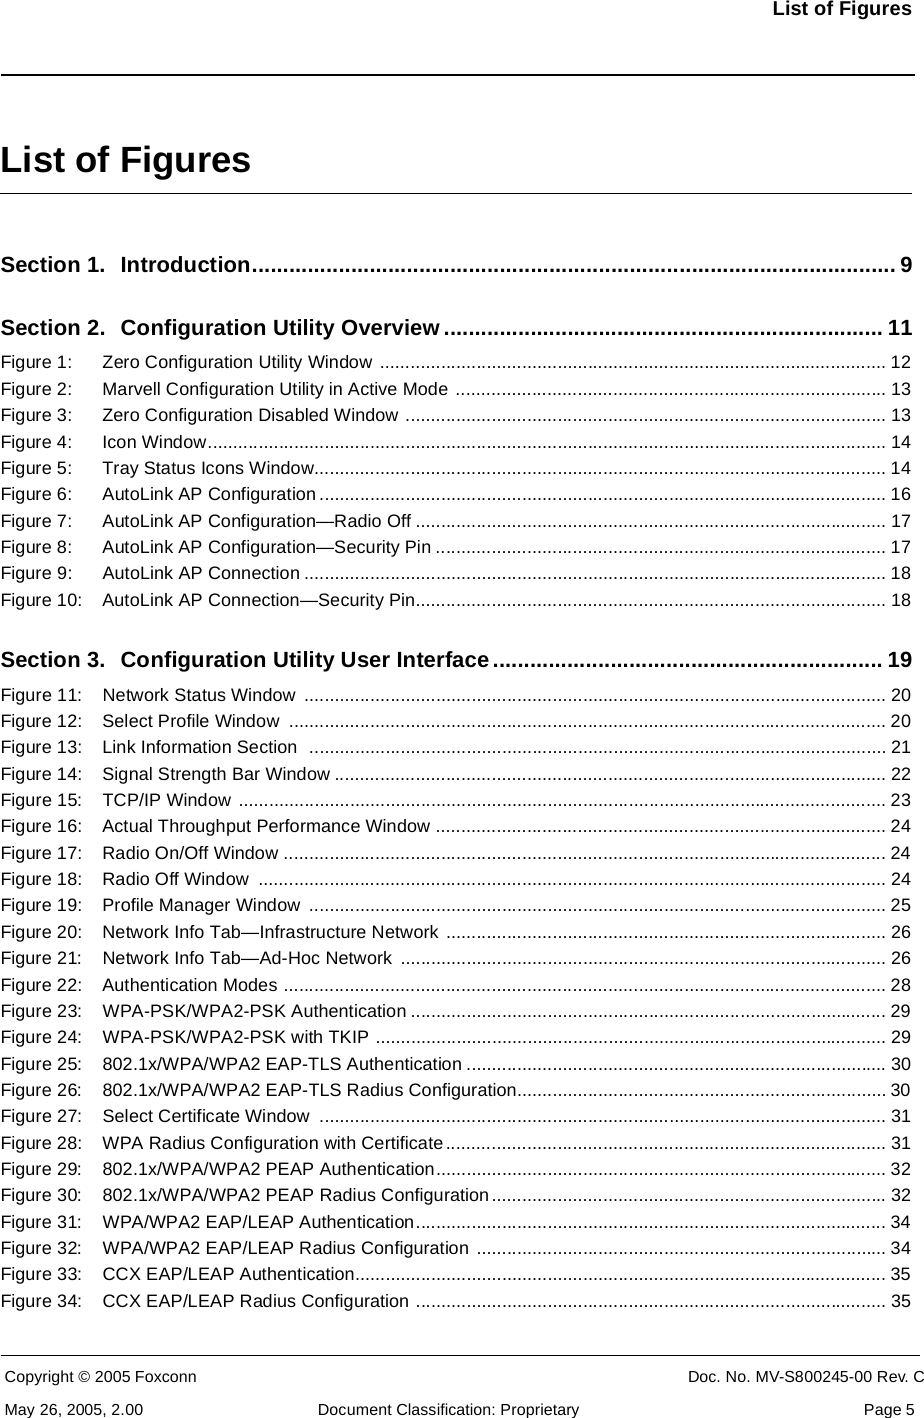 List of FiguresCopyright © 2005 Foxconn CONFIDENTIAL Doc. No. MV-S800245-00 Rev. CMay 26, 2005, 2.00 Document Classification: Proprietary  Page 5List of FiguresSection 1. Introduction........................................................................................................ 9Section 2. Configuration Utility Overview ....................................................................... 11Figure 1: Zero Configuration Utility Window  .................................................................................................... 12Figure 2: Marvell Configuration Utility in Active Mode ..................................................................................... 13Figure 3: Zero Configuration Disabled Window ............................................................................................... 13Figure 4: Icon Window...................................................................................................................................... 14Figure 5: Tray Status Icons Window................................................................................................................. 14Figure 6: AutoLink AP Configuration ................................................................................................................ 16Figure 7: AutoLink AP Configuration—Radio Off ............................................................................................. 17Figure 8: AutoLink AP Configuration—Security Pin ......................................................................................... 17Figure 9: AutoLink AP Connection ................................................................................................................... 18Figure 10: AutoLink AP Connection—Security Pin............................................................................................. 18Section 3. Configuration Utility User Interface............................................................... 19Figure 11: Network Status Window  ................................................................................................................... 20Figure 12: Select Profile Window  ...................................................................................................................... 20Figure 13: Link Information Section  .................................................................................................................. 21Figure 14: Signal Strength Bar Window ............................................................................................................. 22Figure 15: TCP/IP Window  ................................................................................................................................ 23Figure 16: Actual Throughput Performance Window ......................................................................................... 24Figure 17: Radio On/Off Window ....................................................................................................................... 24Figure 18: Radio Off Window  ............................................................................................................................ 24Figure 19: Profile Manager Window  .................................................................................................................. 25Figure 20: Network Info Tab—Infrastructure Network ....................................................................................... 26Figure 21: Network Info Tab—Ad-Hoc Network  ................................................................................................ 26Figure 22: Authentication Modes ....................................................................................................................... 28Figure 23: WPA-PSK/WPA2-PSK Authentication .............................................................................................. 29Figure 24: WPA-PSK/WPA2-PSK with TKIP ..................................................................................................... 29Figure 25: 802.1x/WPA/WPA2 EAP-TLS Authentication ................................................................................... 30Figure 26: 802.1x/WPA/WPA2 EAP-TLS Radius Configuration......................................................................... 30Figure 27: Select Certificate Window  ................................................................................................................ 31Figure 28: WPA Radius Configuration with Certificate....................................................................................... 31Figure 29: 802.1x/WPA/WPA2 PEAP Authentication......................................................................................... 32Figure 30: 802.1x/WPA/WPA2 PEAP Radius Configuration.............................................................................. 32Figure 31: WPA/WPA2 EAP/LEAP Authentication............................................................................................. 34Figure 32: WPA/WPA2 EAP/LEAP Radius Configuration ................................................................................. 34Figure 33: CCX EAP/LEAP Authentication......................................................................................................... 35Figure 34: CCX EAP/LEAP Radius Configuration ............................................................................................. 35